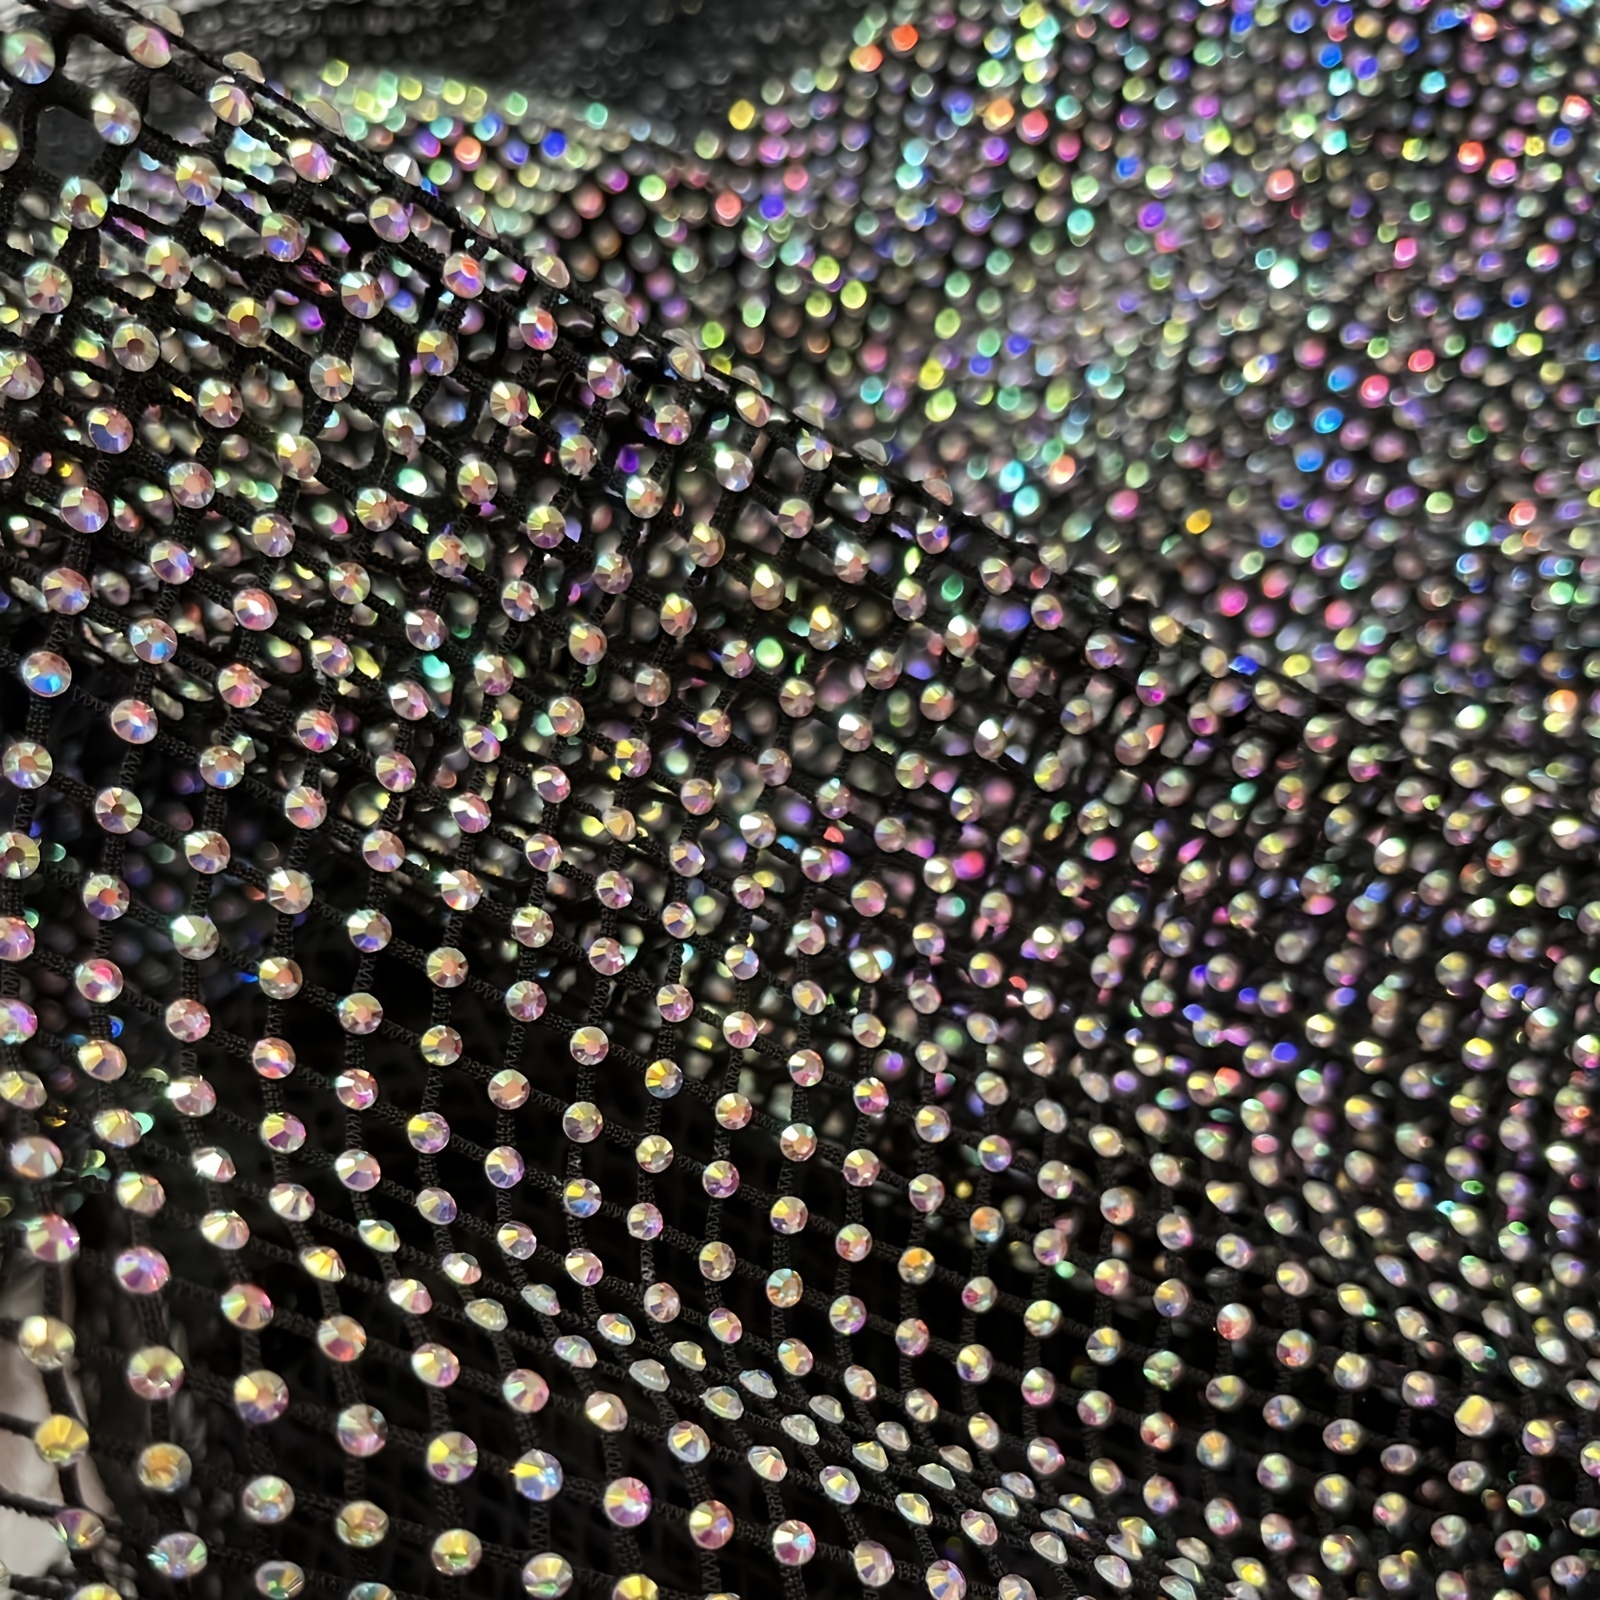 Exquisite AB Color Rhinestone Fabric Stretchy Mesh, a Yard (48 inch by 36  inch) Black